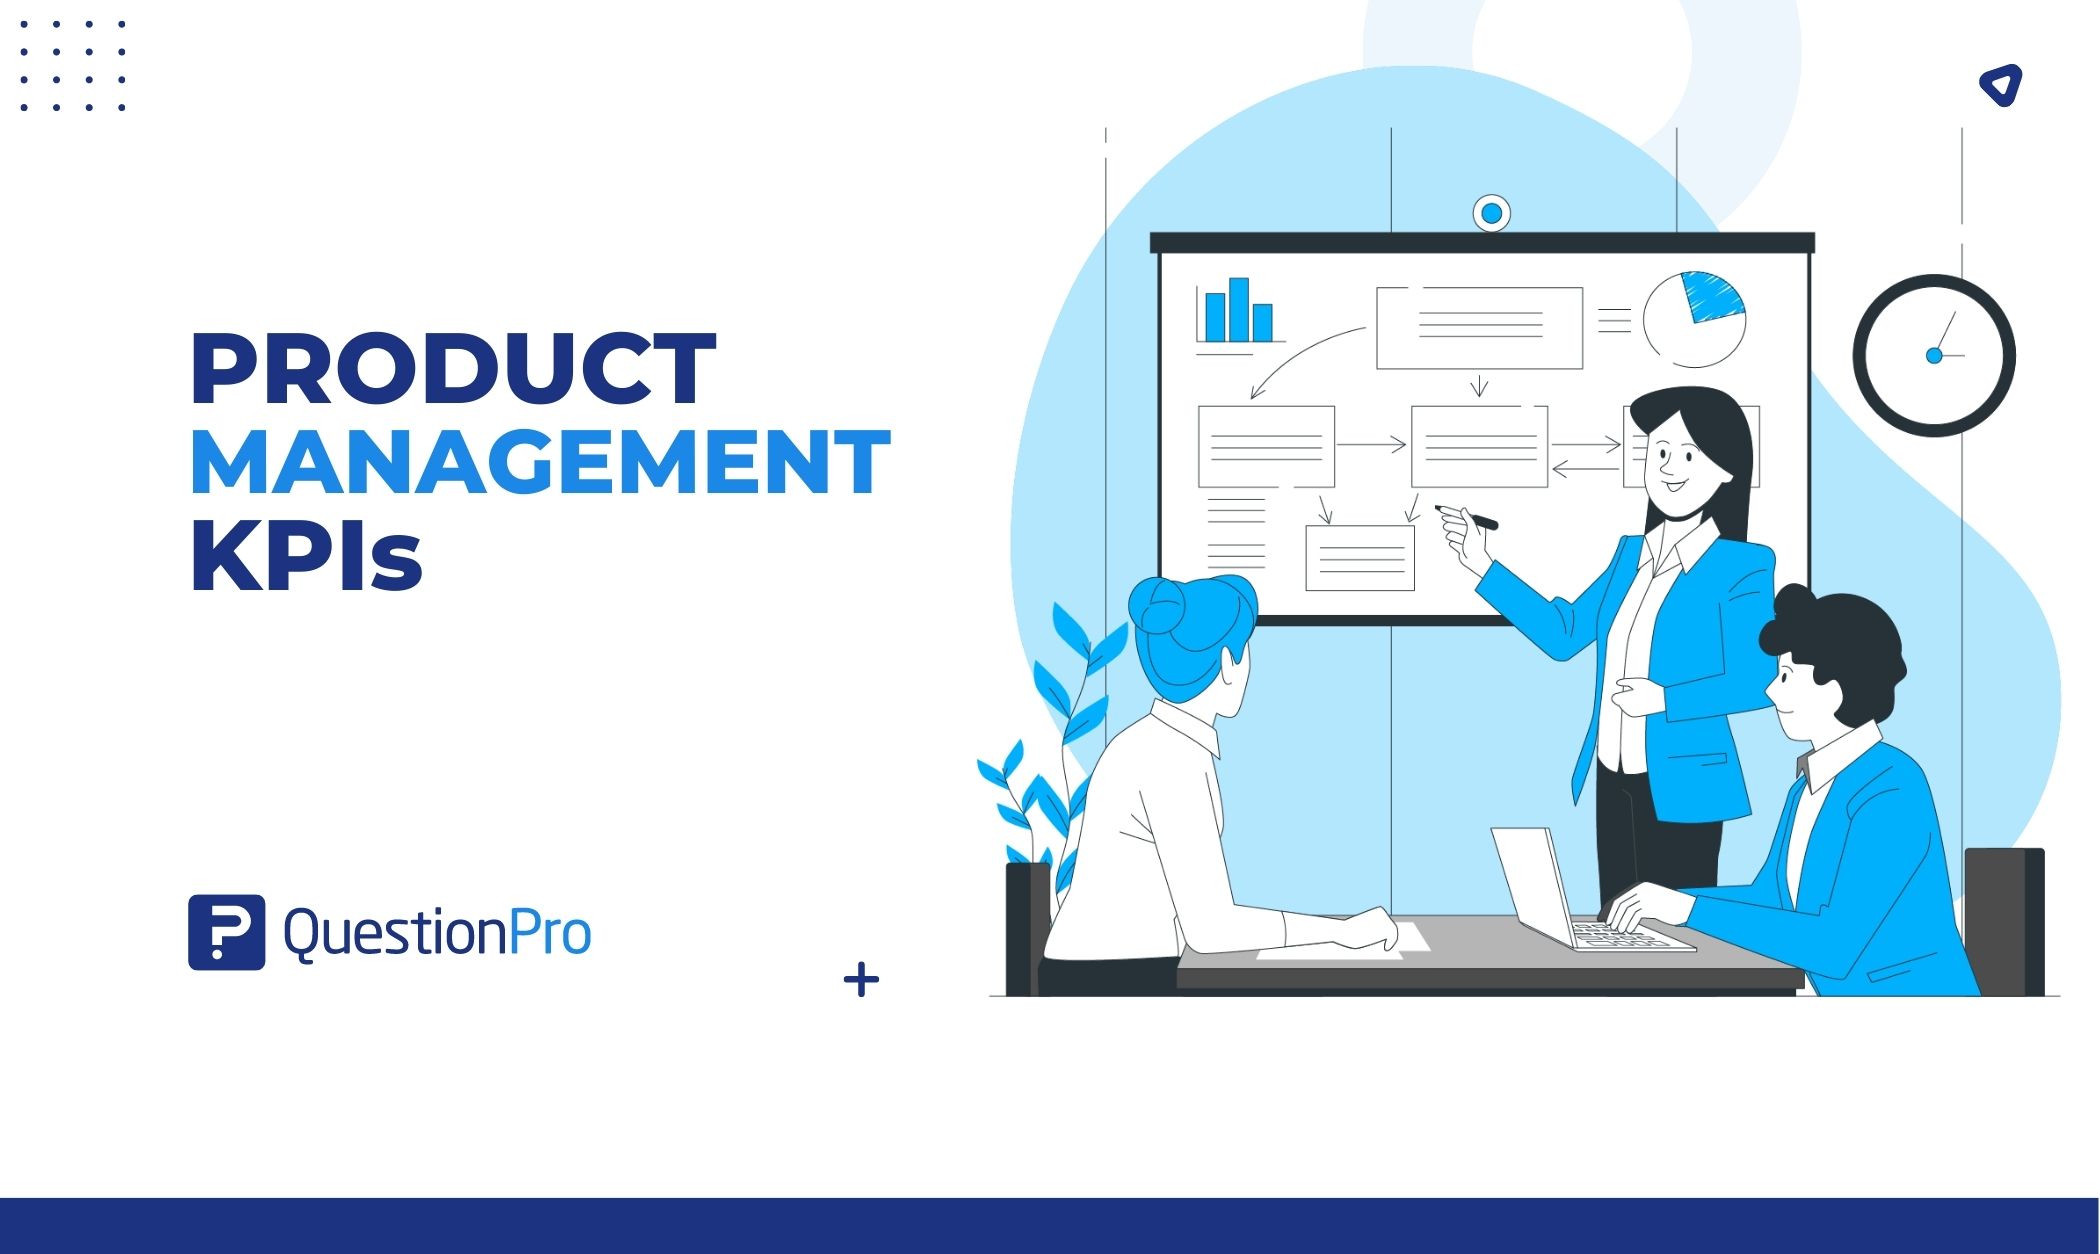 Product management KPIs shows how often users utilize your product and analyze it usage data. Learn if & when users return to your product.